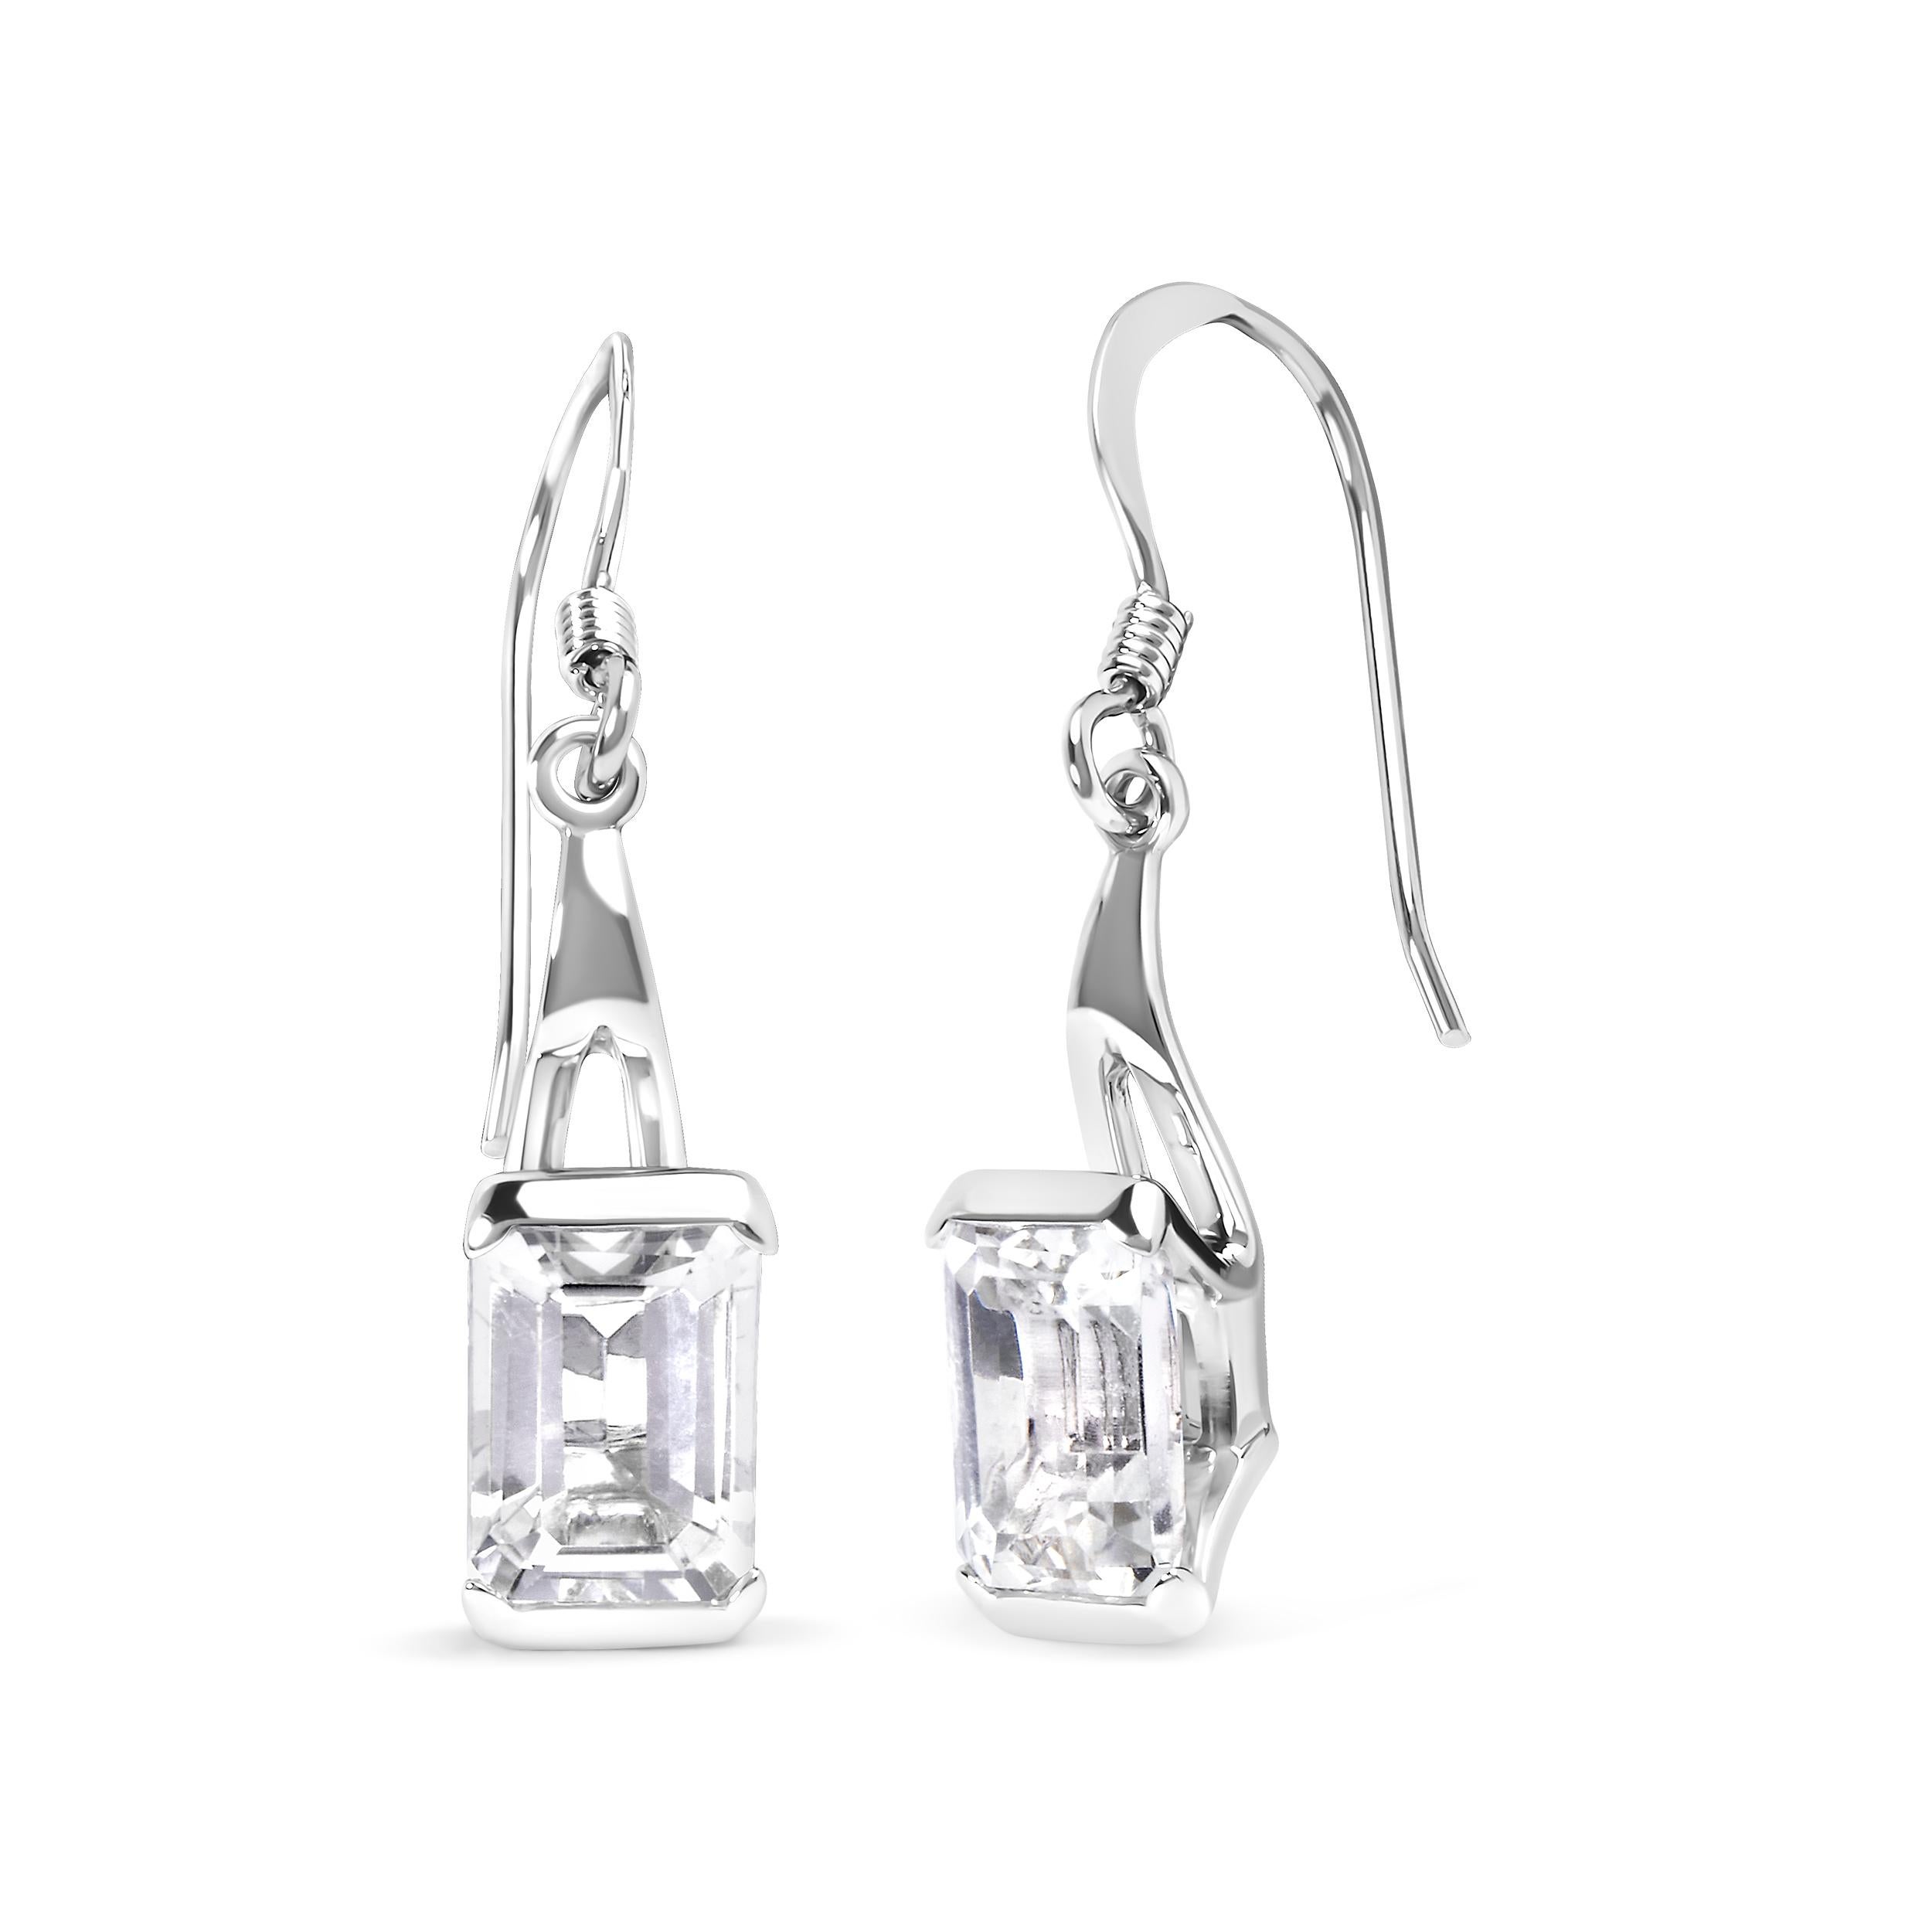 Introducing a dazzling masterpiece that will leave you breathless - a pair of .925 Sterling Silver Emerald Cut White Topaz Solitaire Dangle Earrings. Crafted with love and precision, these earrings boast a remarkable 3.0 cttw of AAA quality white